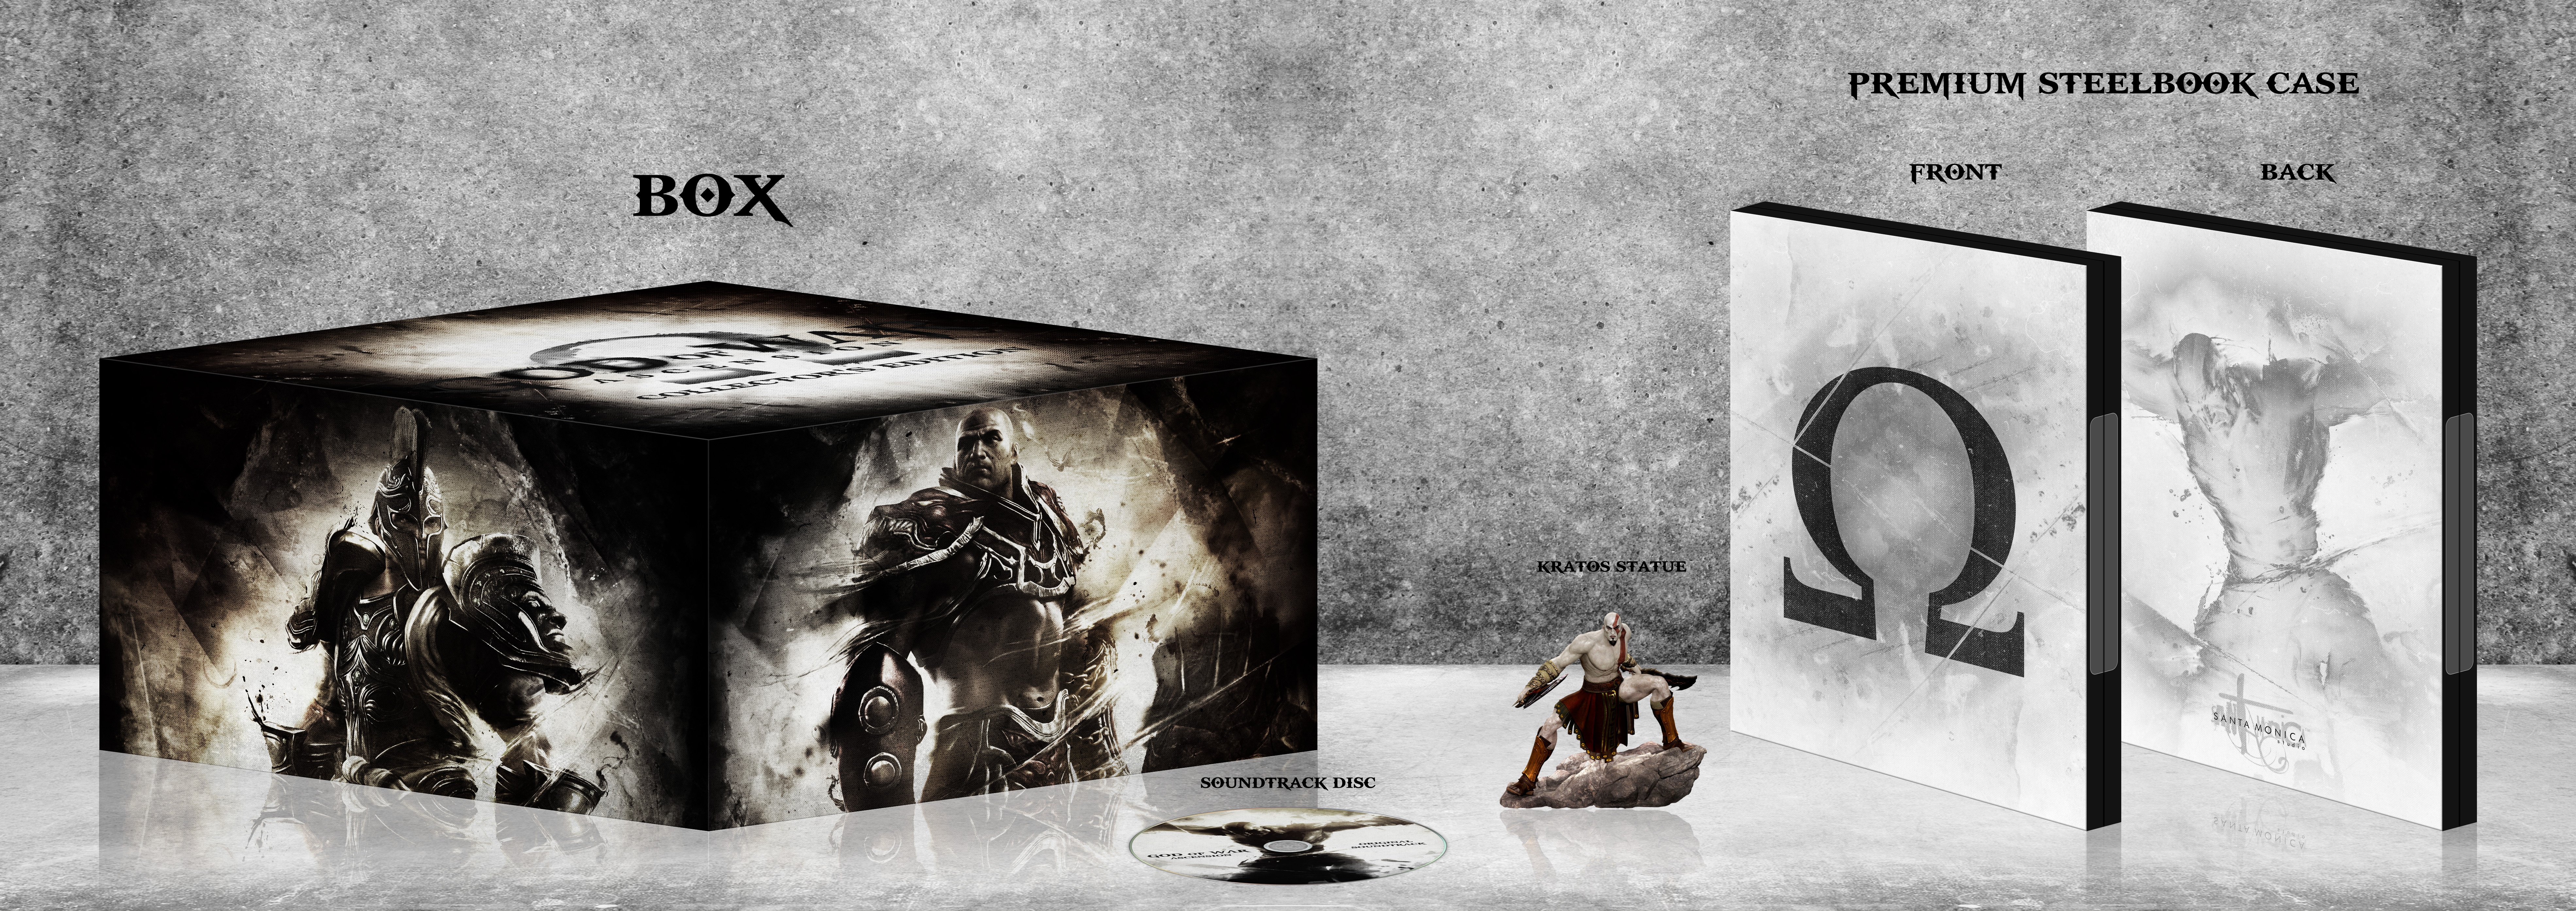 God of War: Ascension Collector's Edition box cover